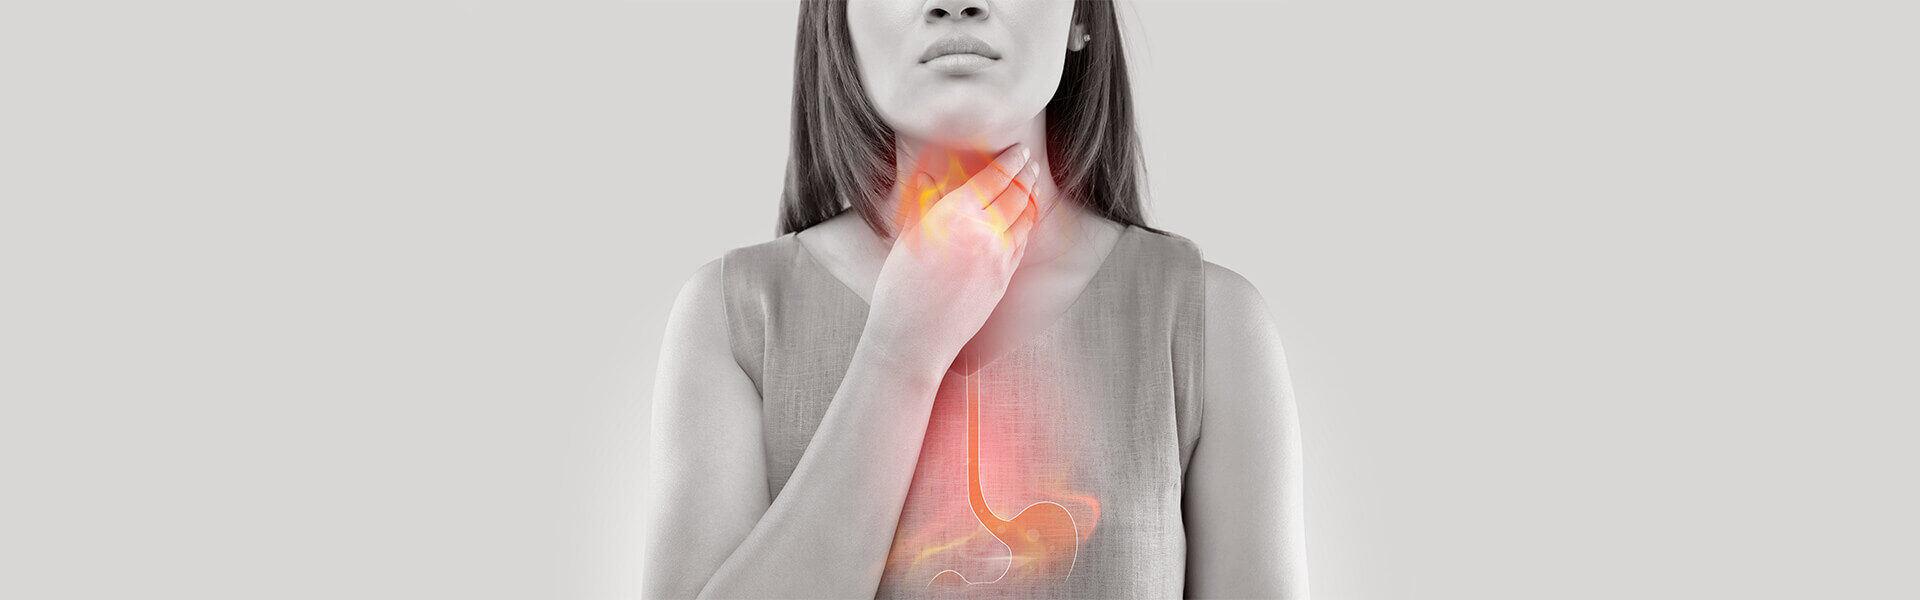 Is There a Difference Between Heartburn, Acid Reflux, and Gastroesophageal Reflux Disease (GERD)?